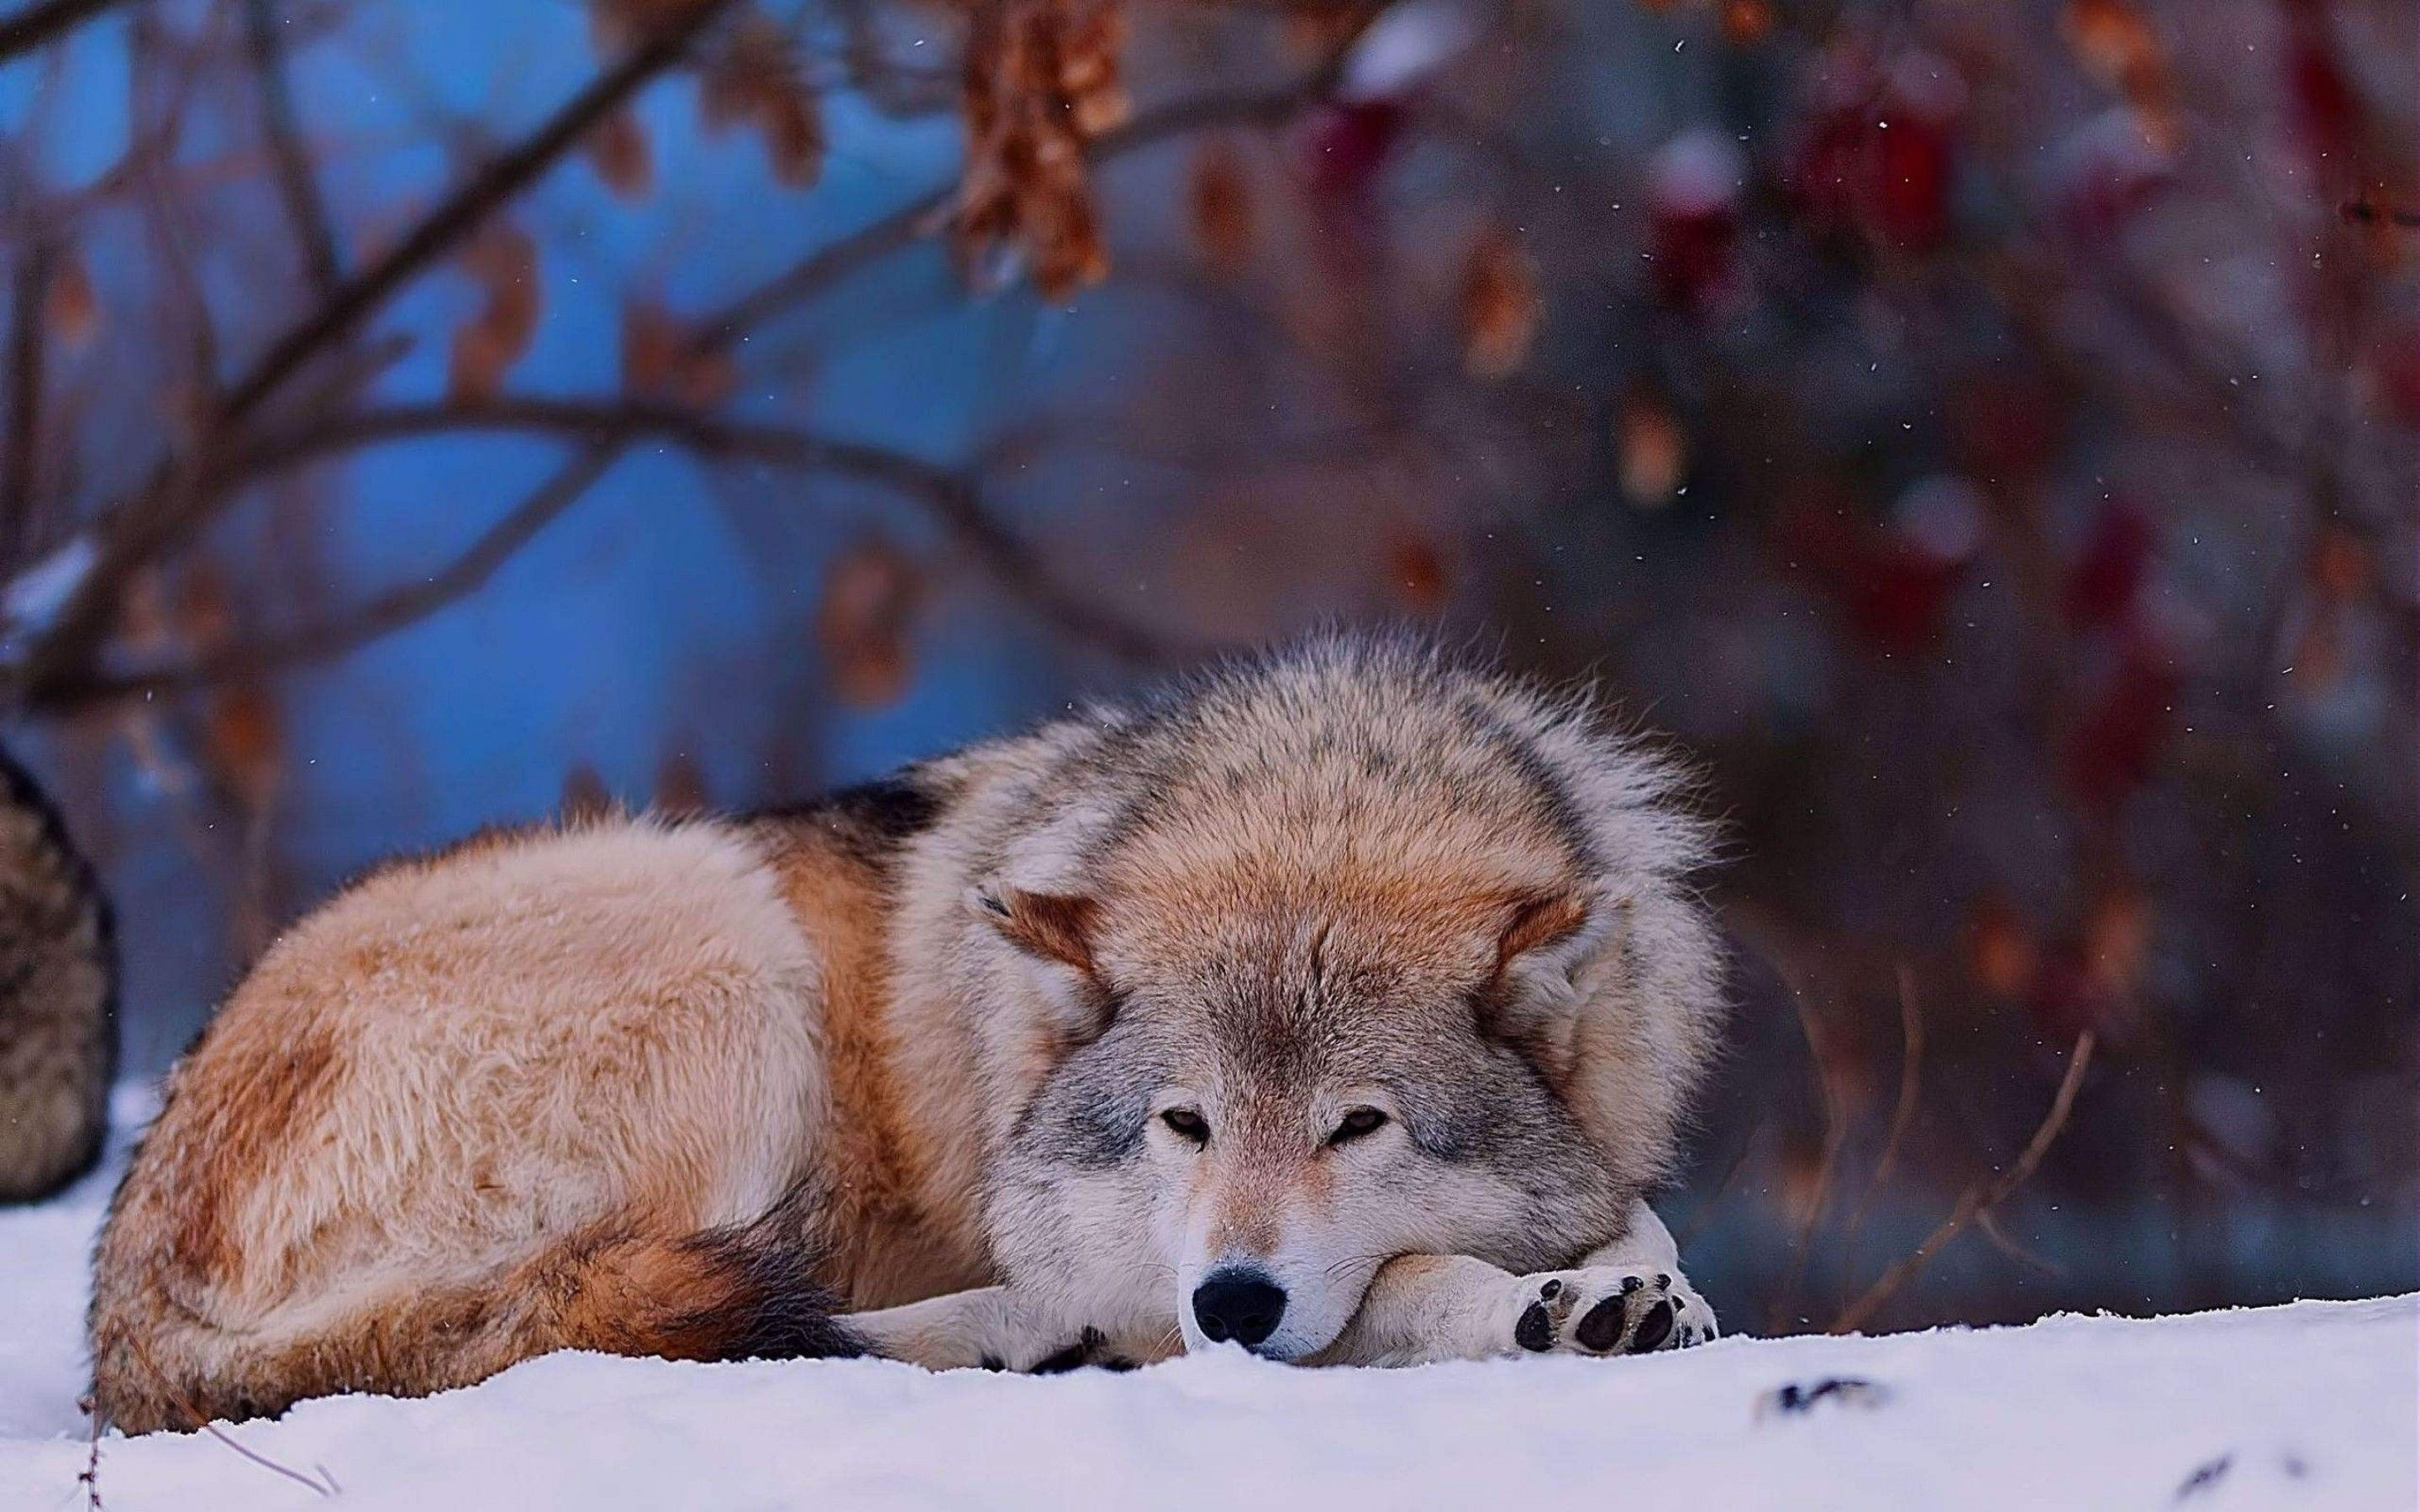 lie, wolf, sadness, animals, to lie down, dog, sorrow wallpaper for mobile